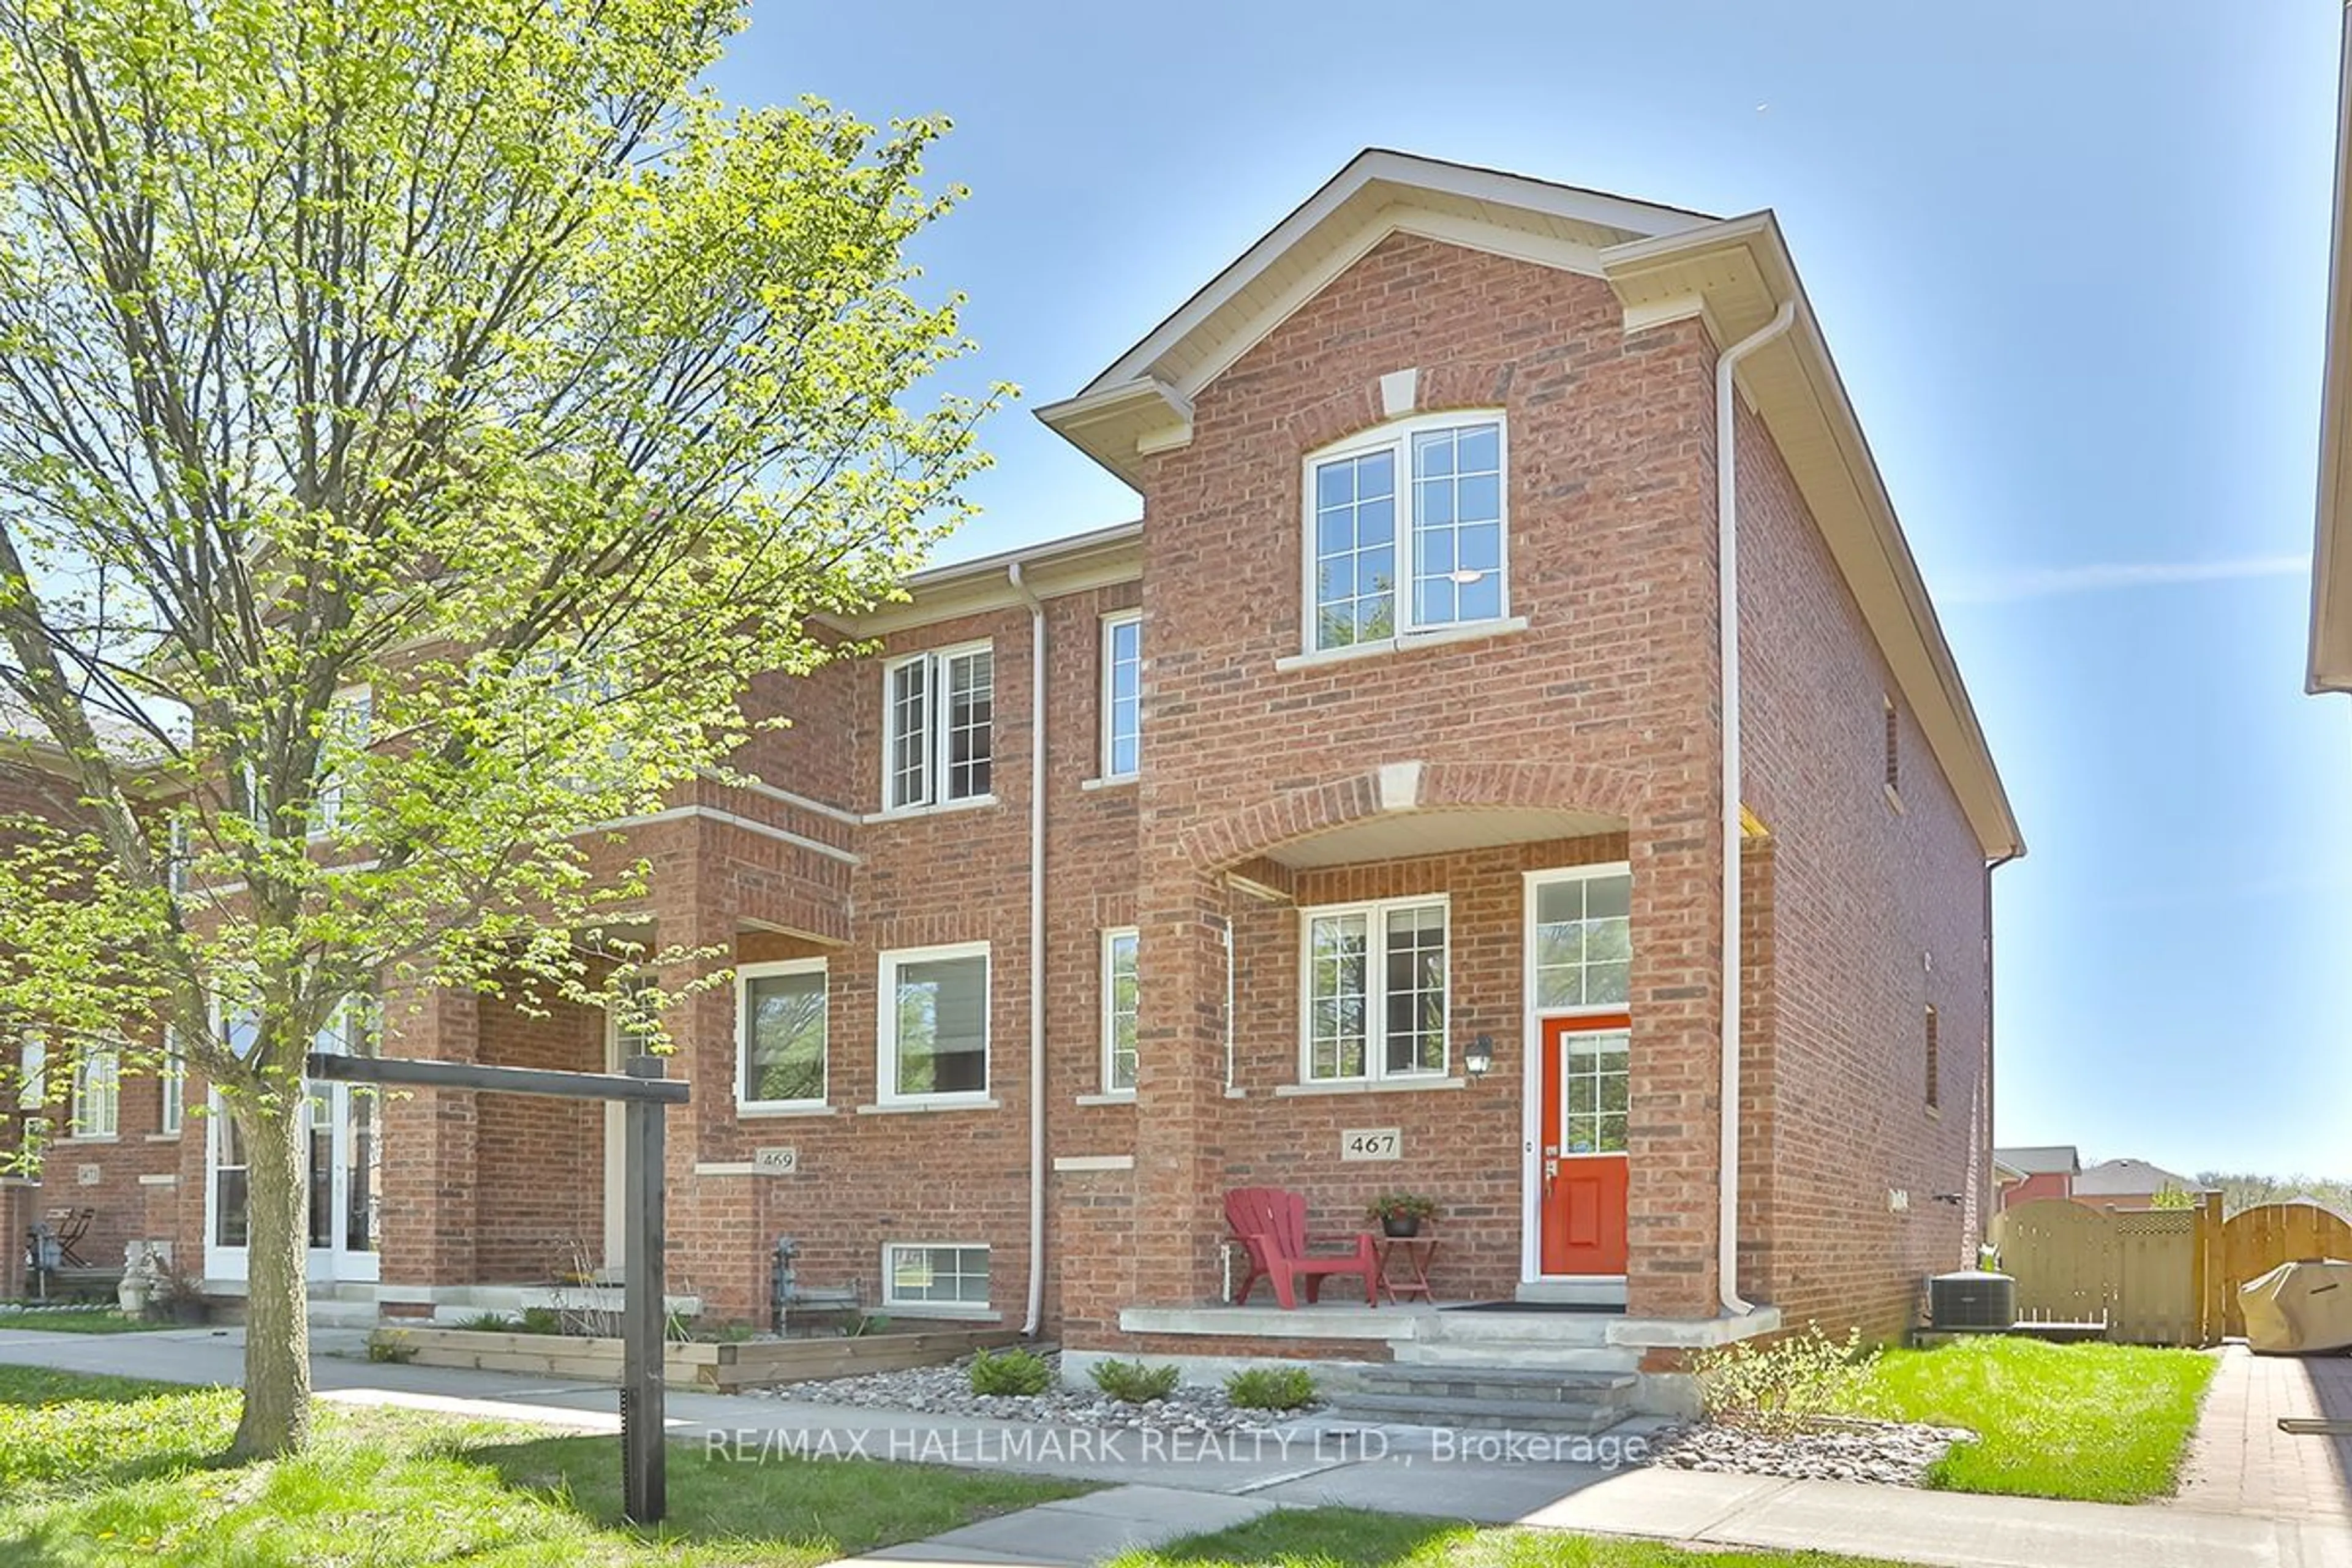 Home with brick exterior material for 467 White's Hill Ave, Markham Ontario L6B 0J7